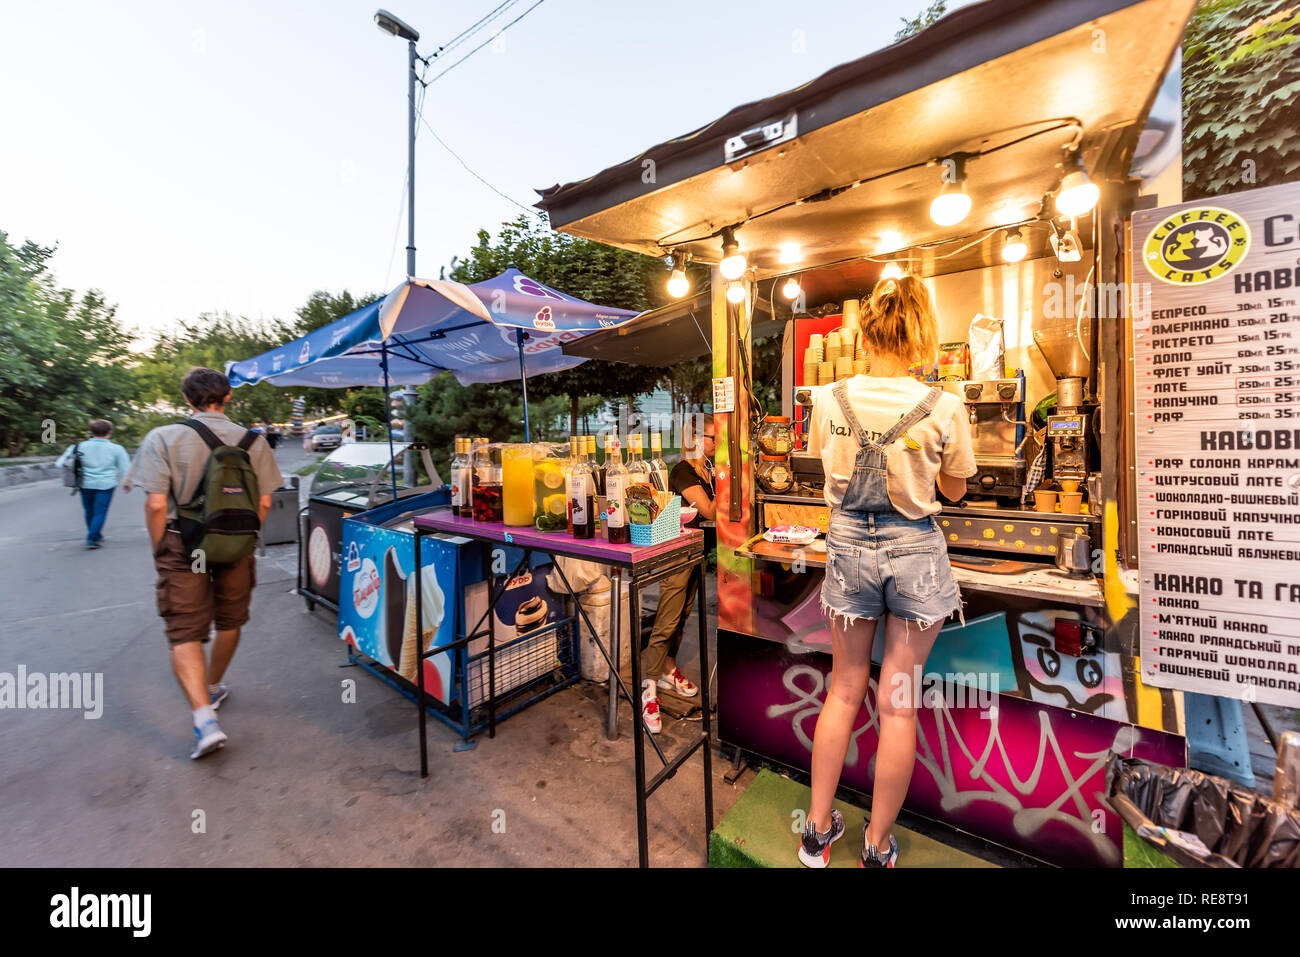 Kyiv, Ukraine - August 10, 2018: Kiev capital city during evening night with people on street in park by road ordering coffee from food stand during s Stock Photo